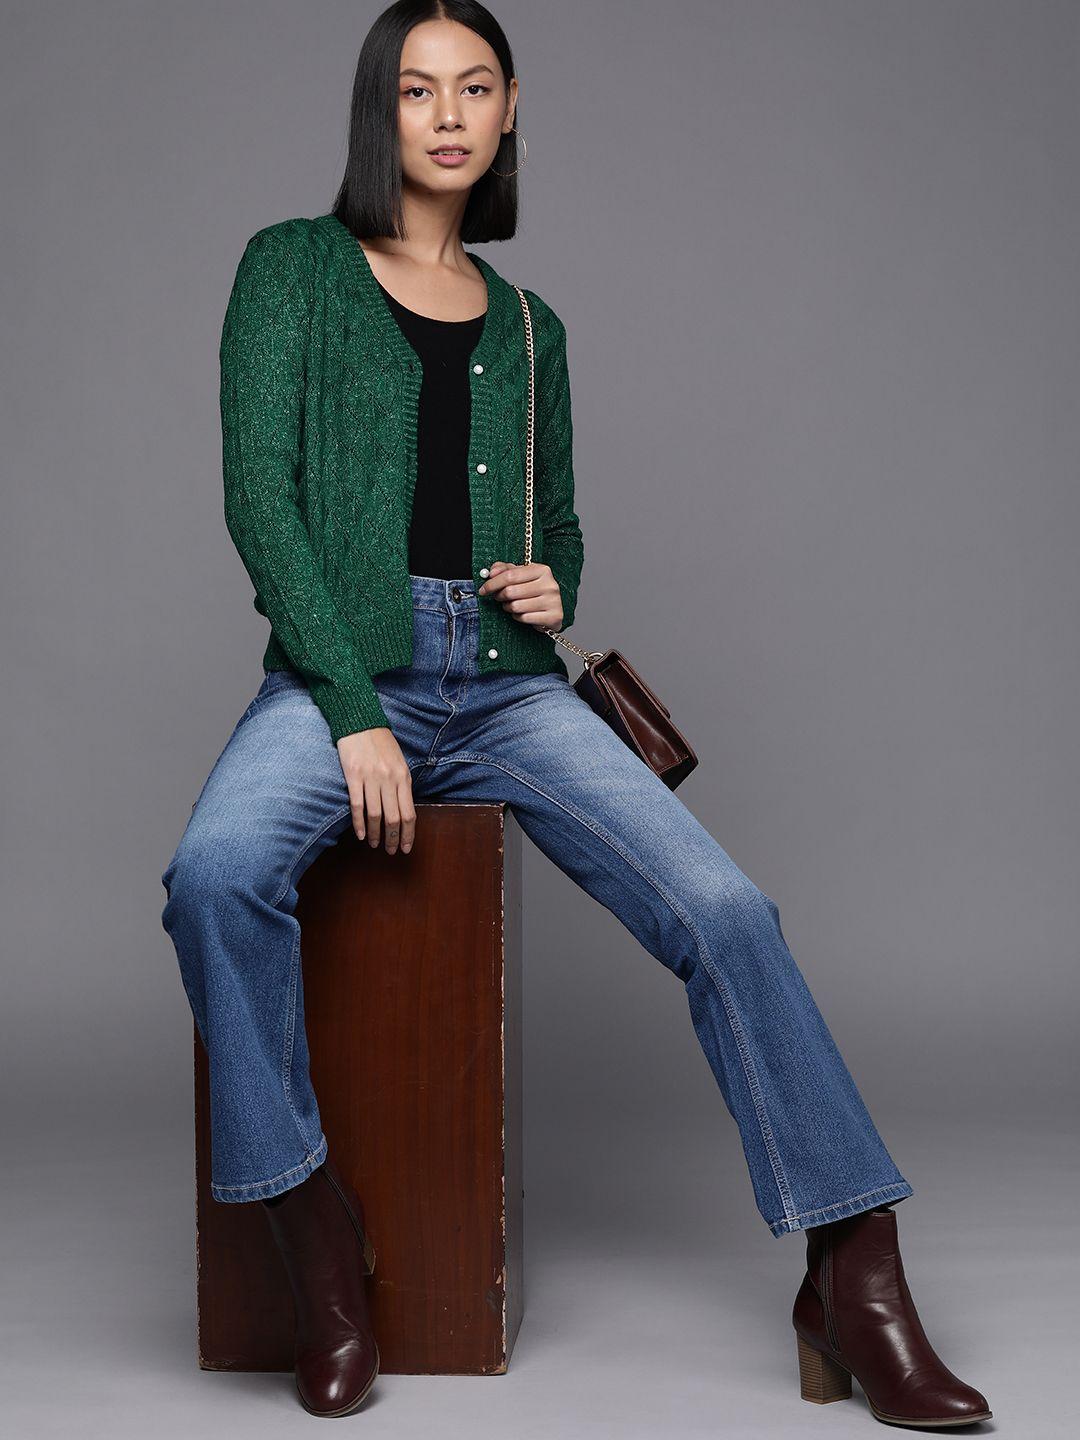 allen-solly-woman-green-cable-knit-cardigan